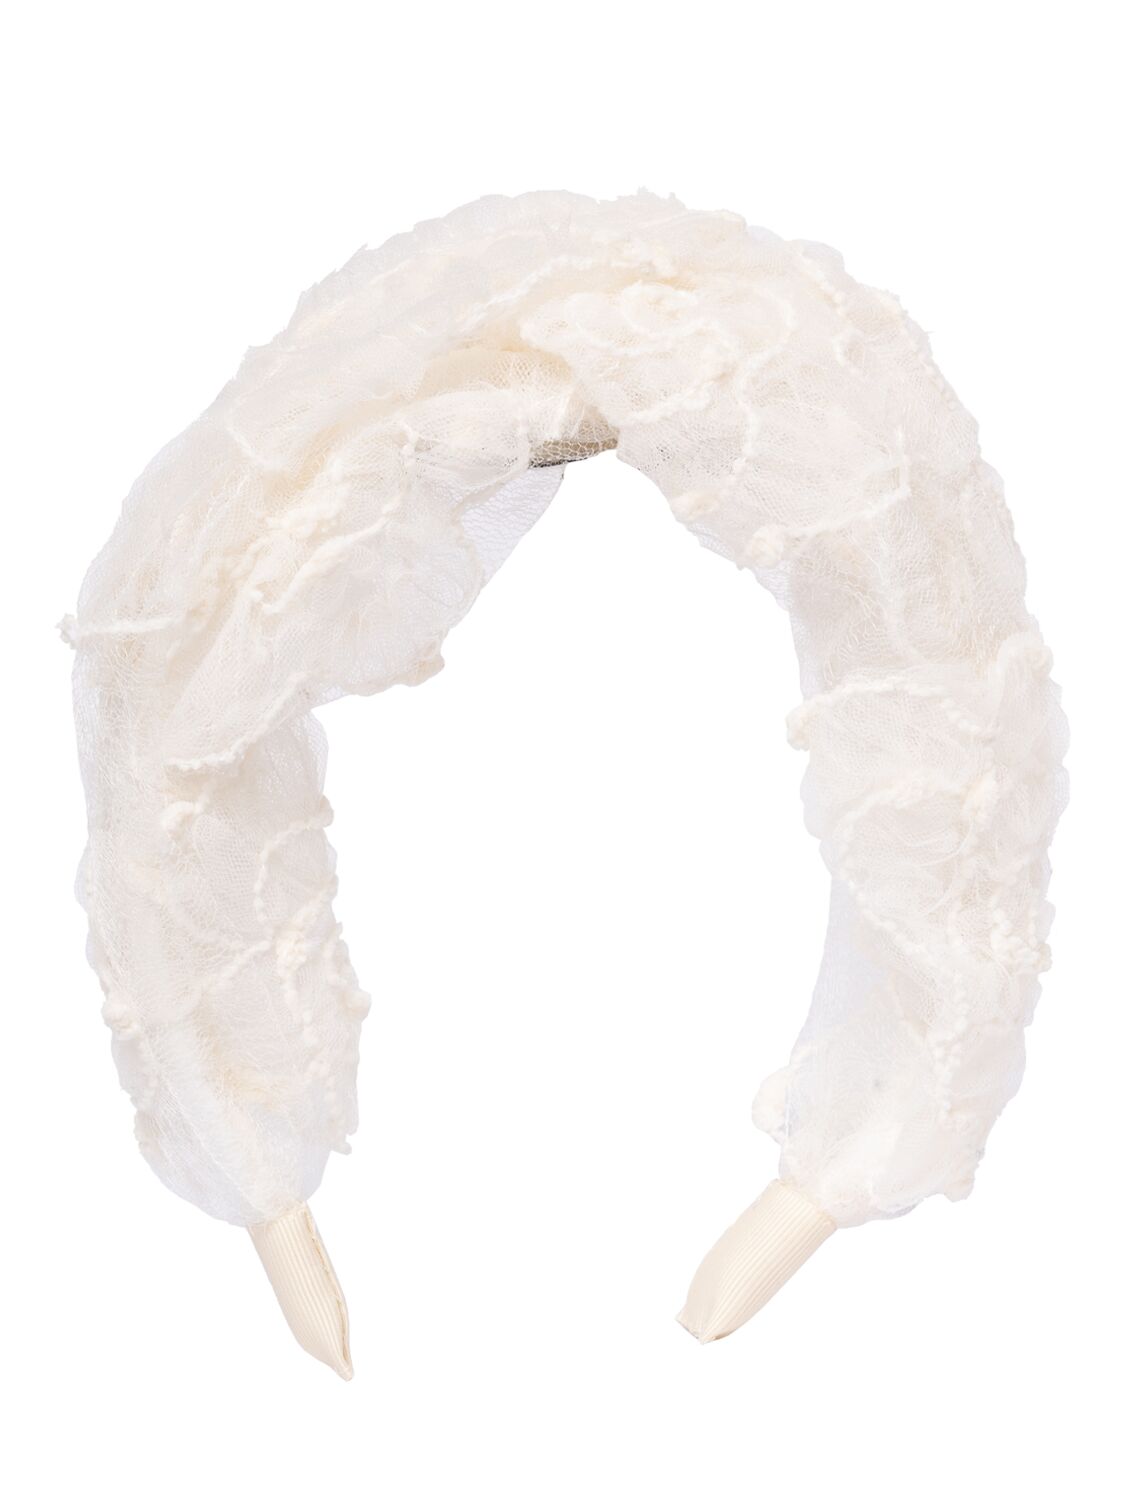 Image of Embroidered Lace Headband